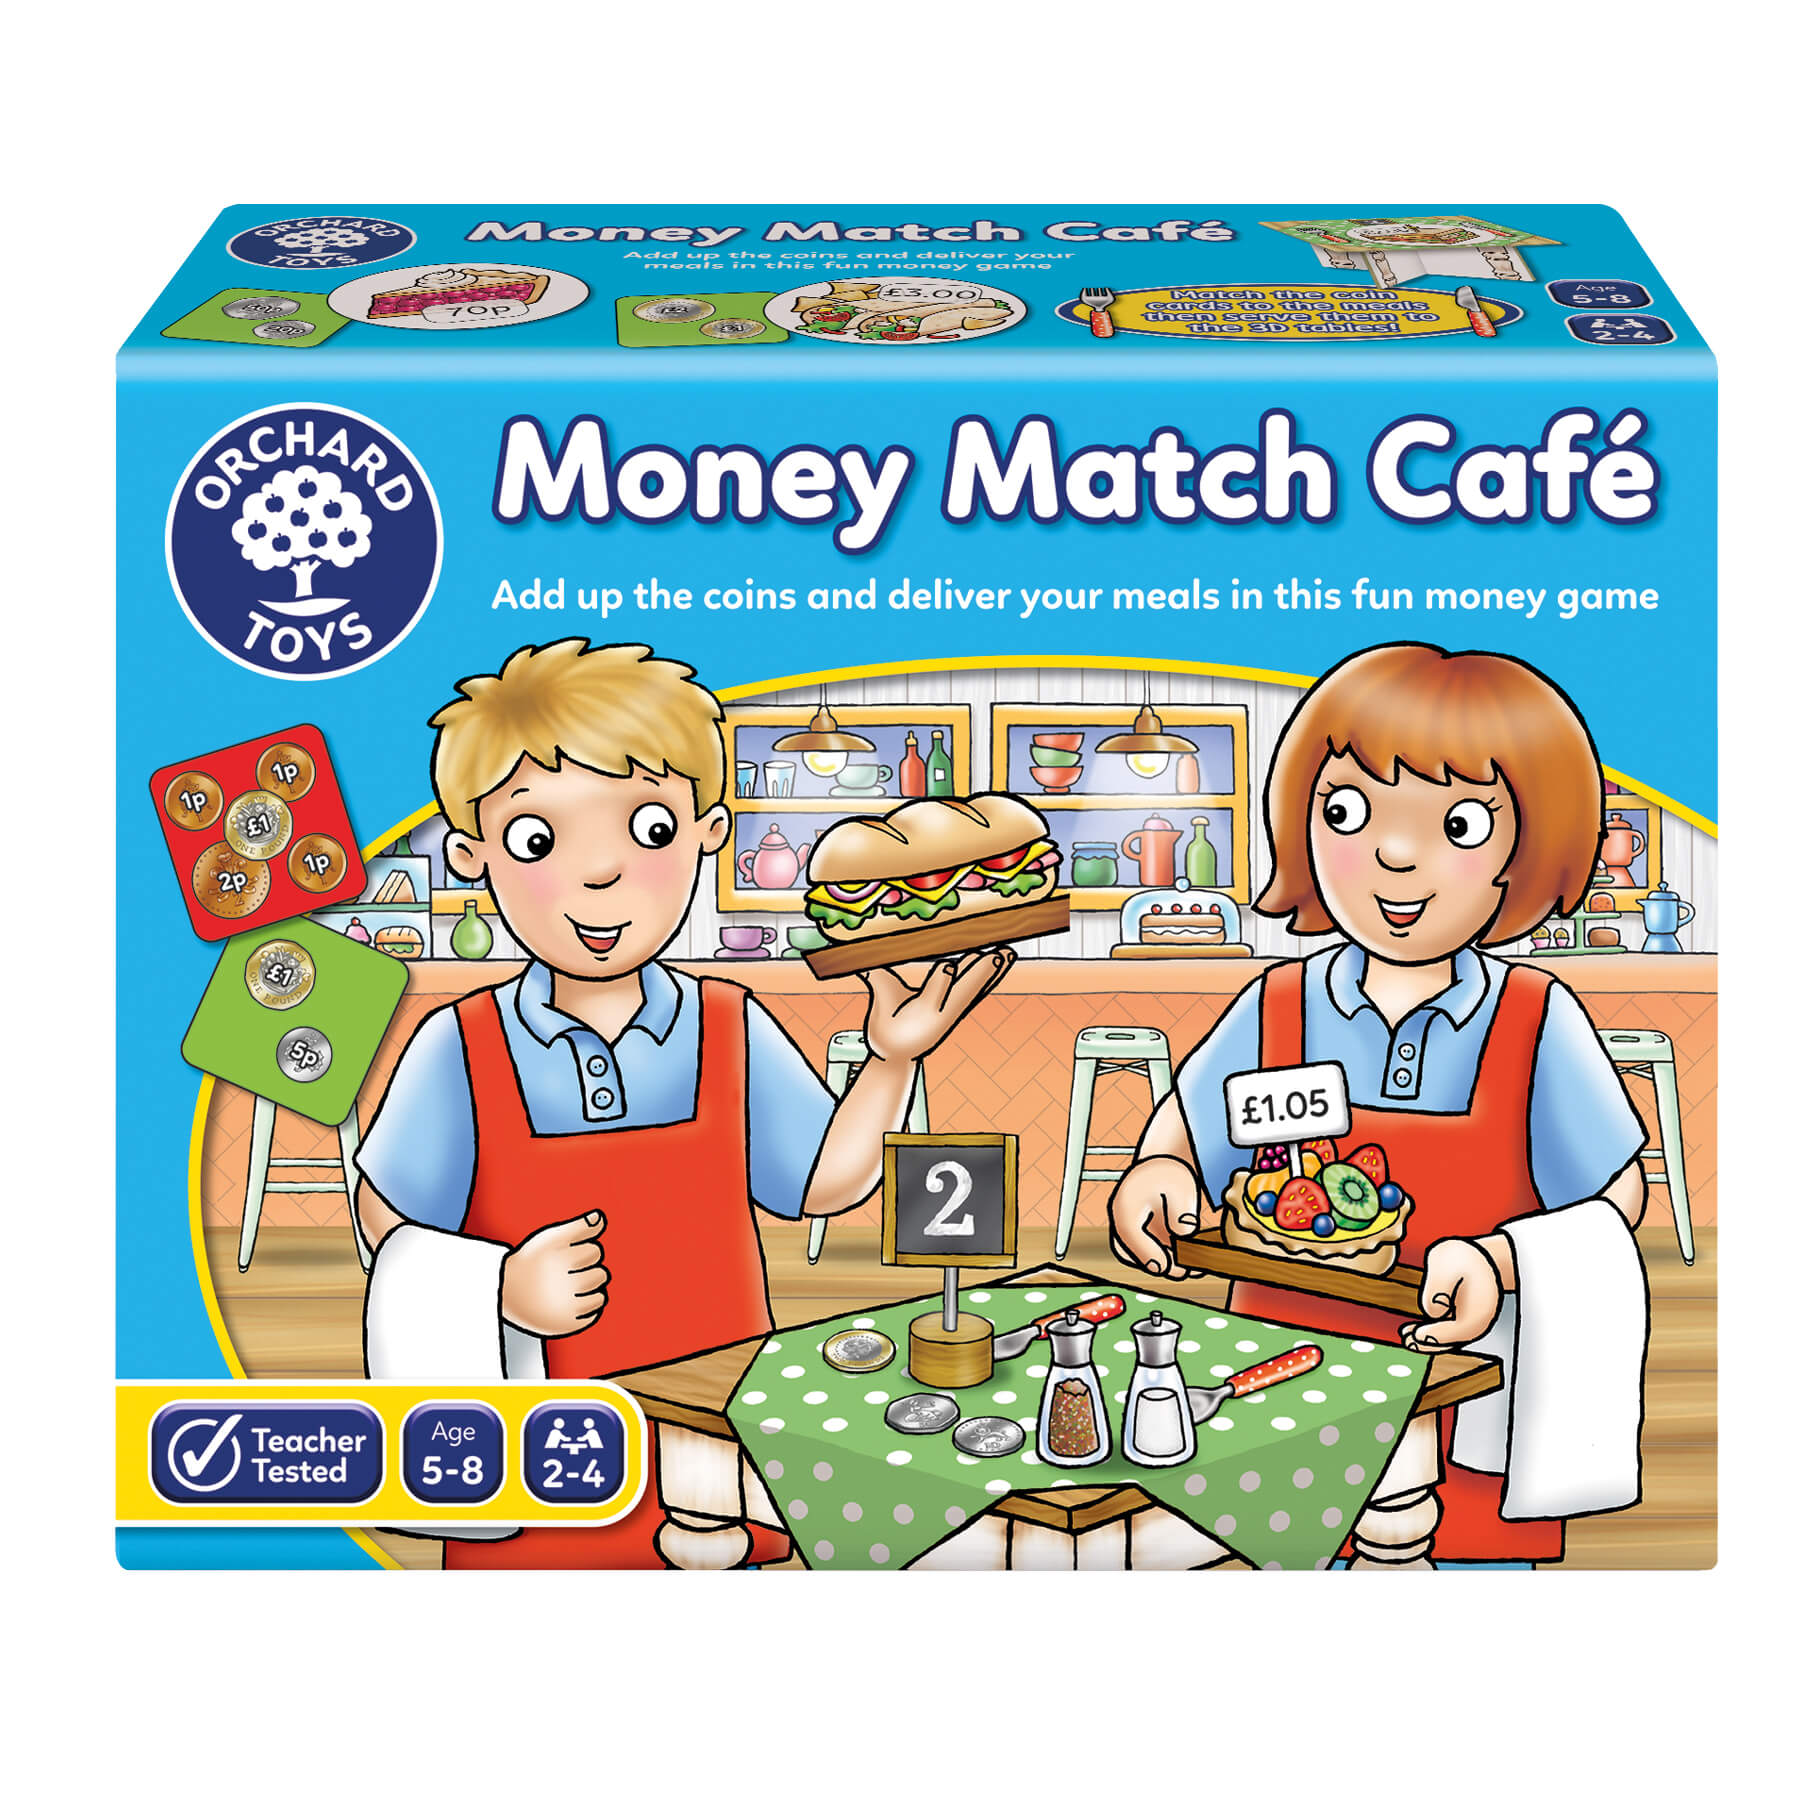 Money match cafe - money game from Orchard Toys - The Toy Room